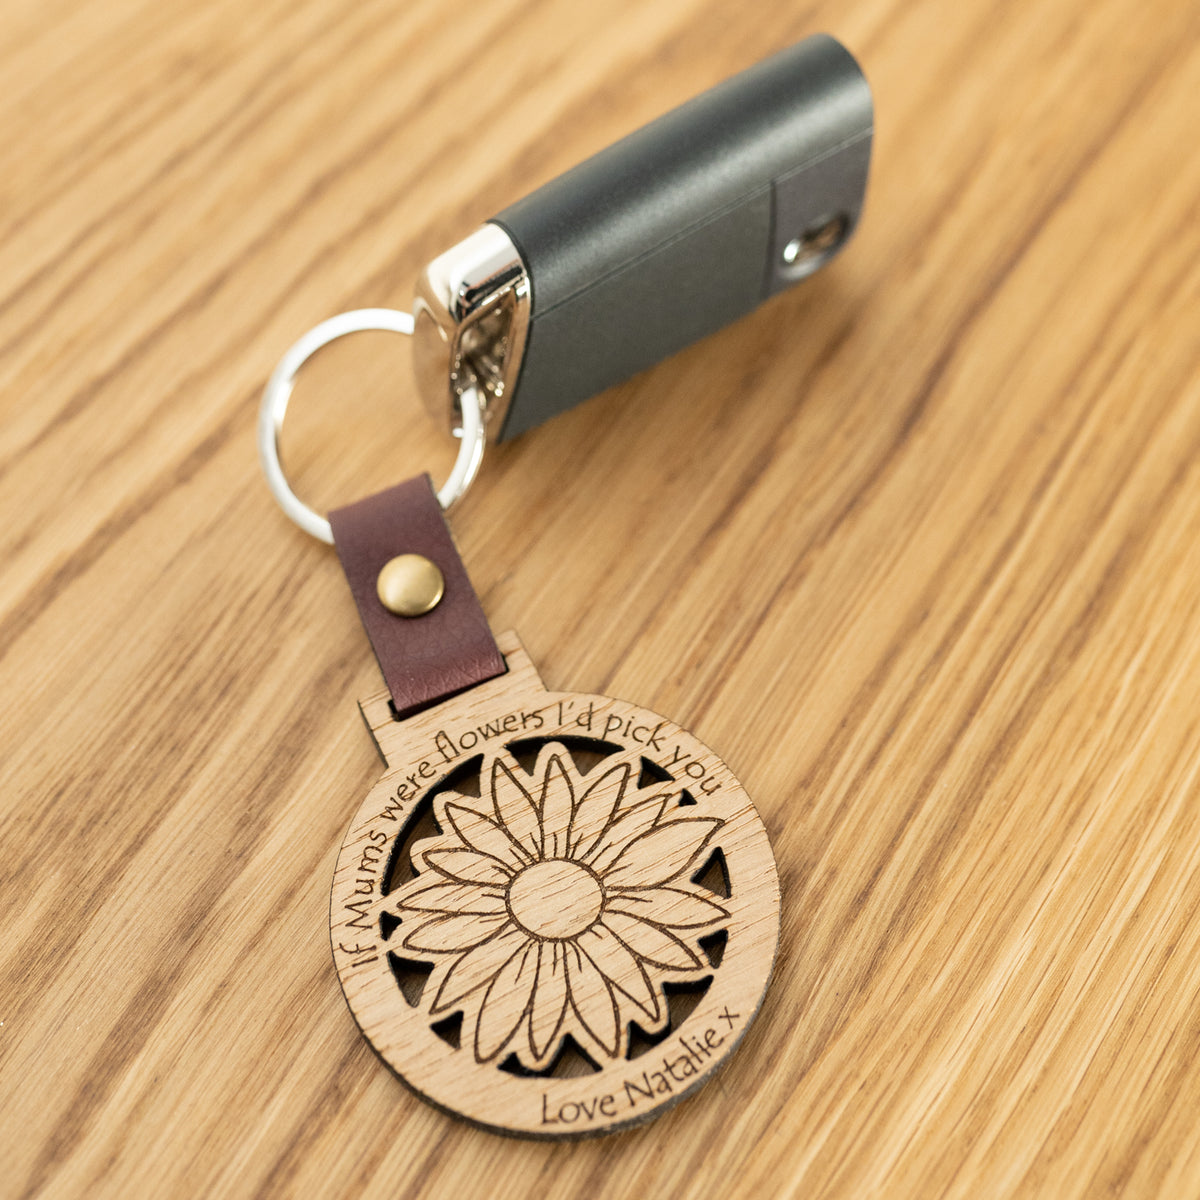 &#39;If Mums were Flowers, I&#39;d pick You&#39; Keyring